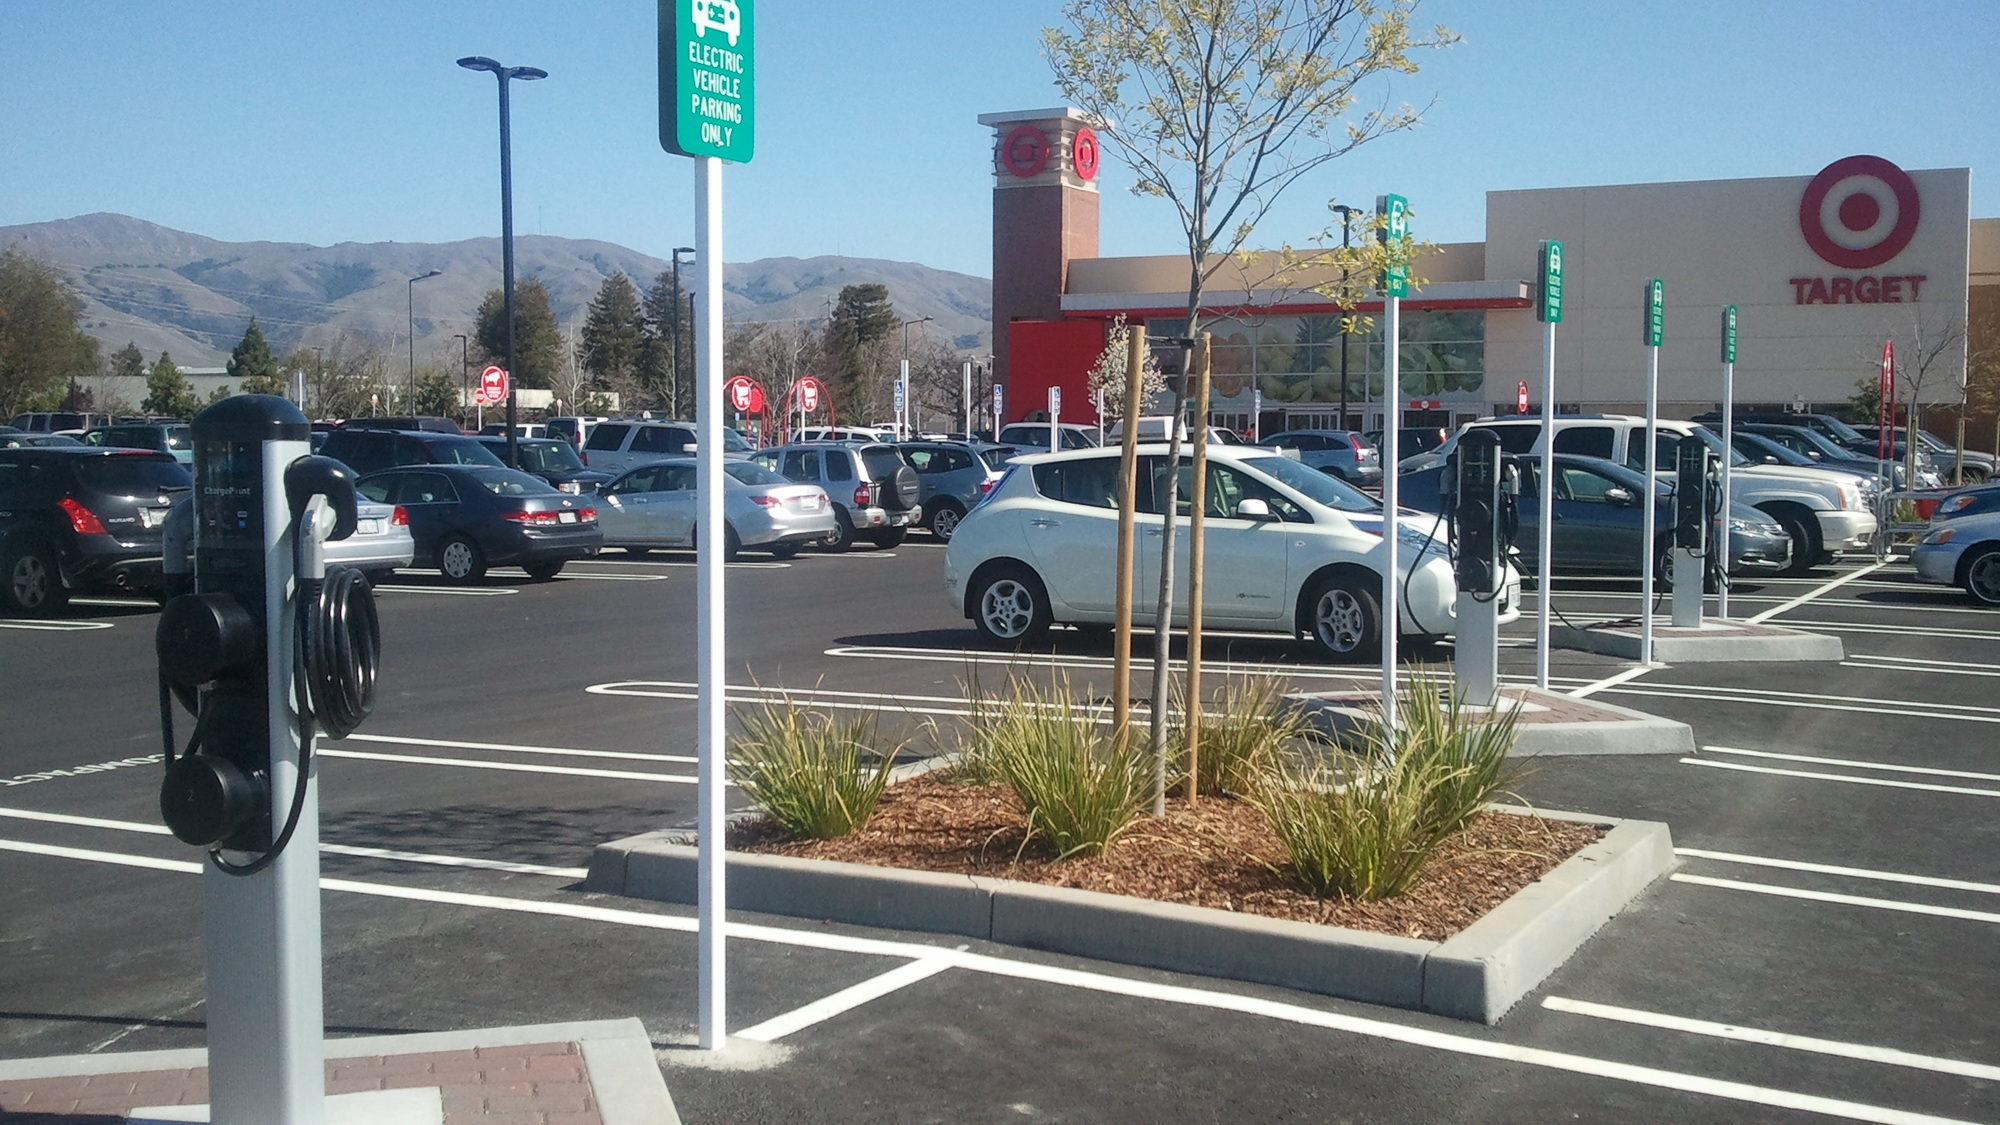 How To Do Electric Car Chargers Right New Target Store In Ca,My Heart Home Is Where The Heart Is Quotes